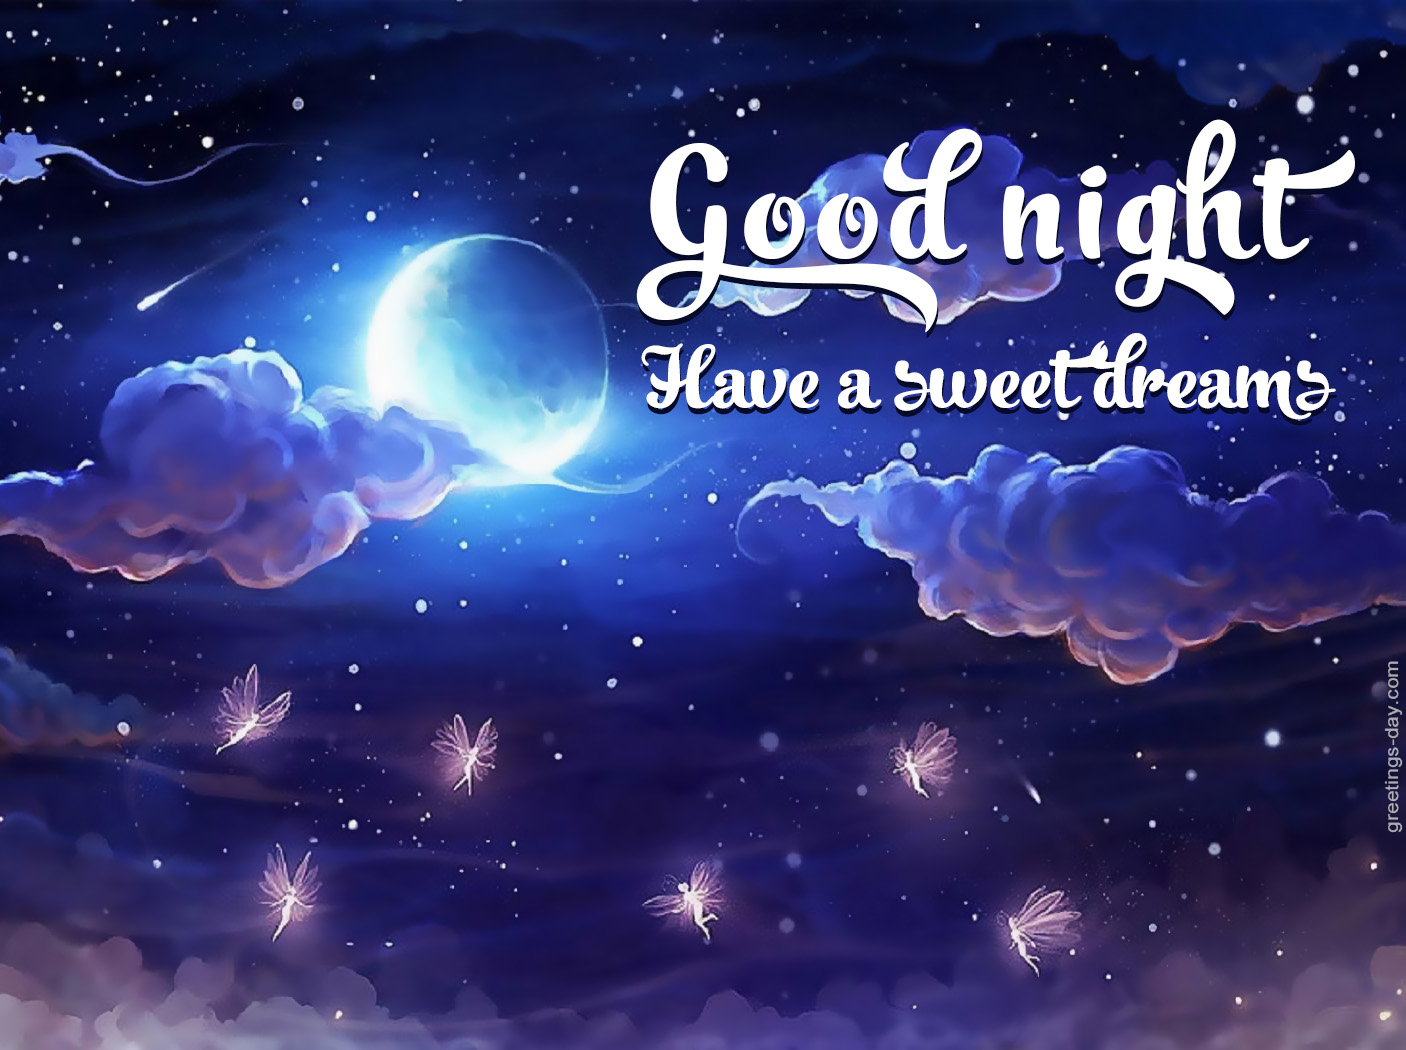 good night images hd download